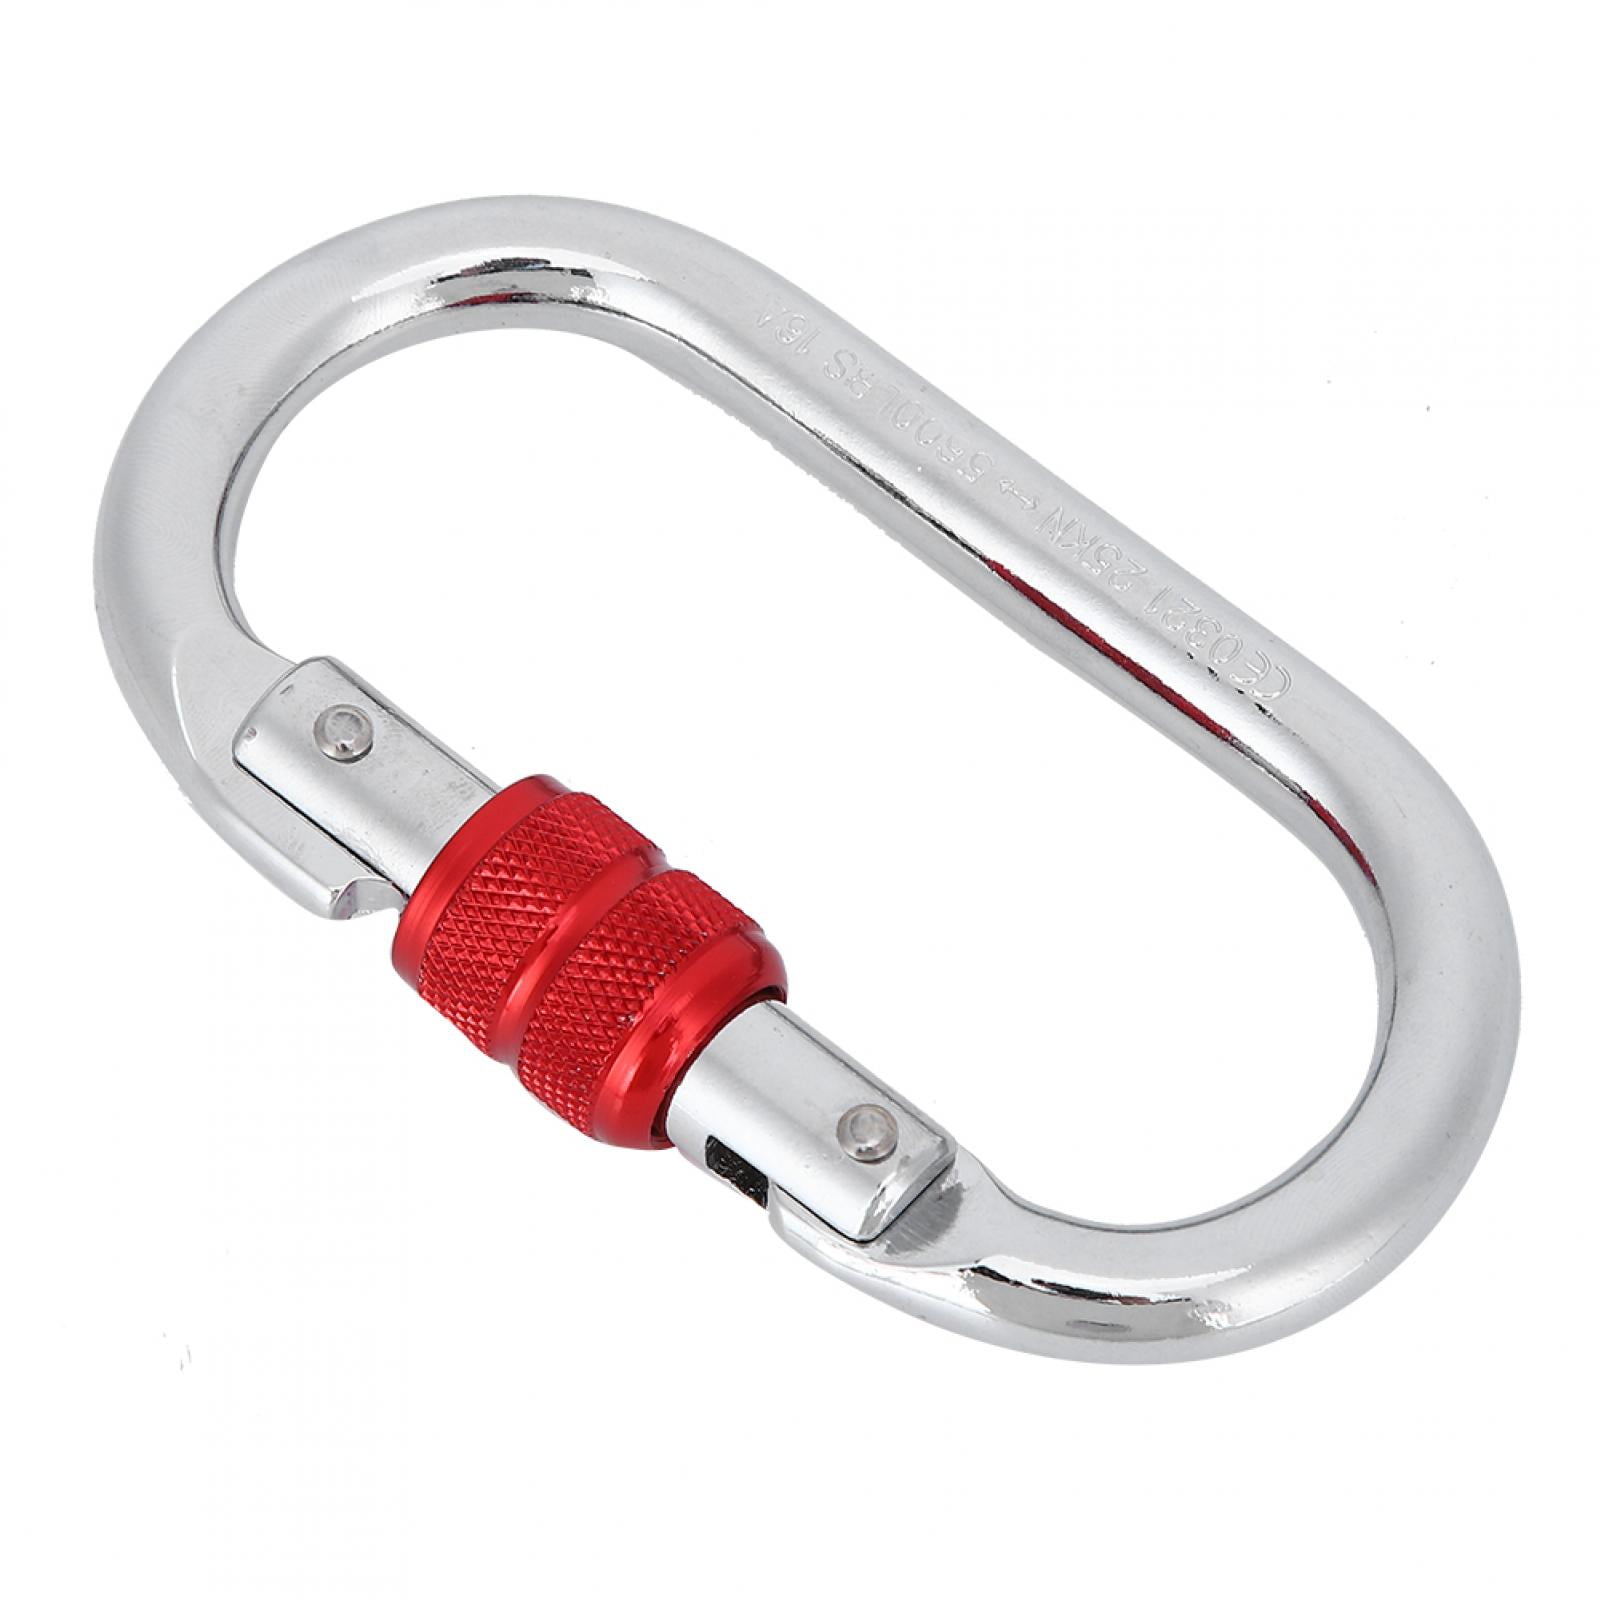 1 x Outdoor Safety Buckle With Lock Climbing Button Carabiner Hook Ring SL 